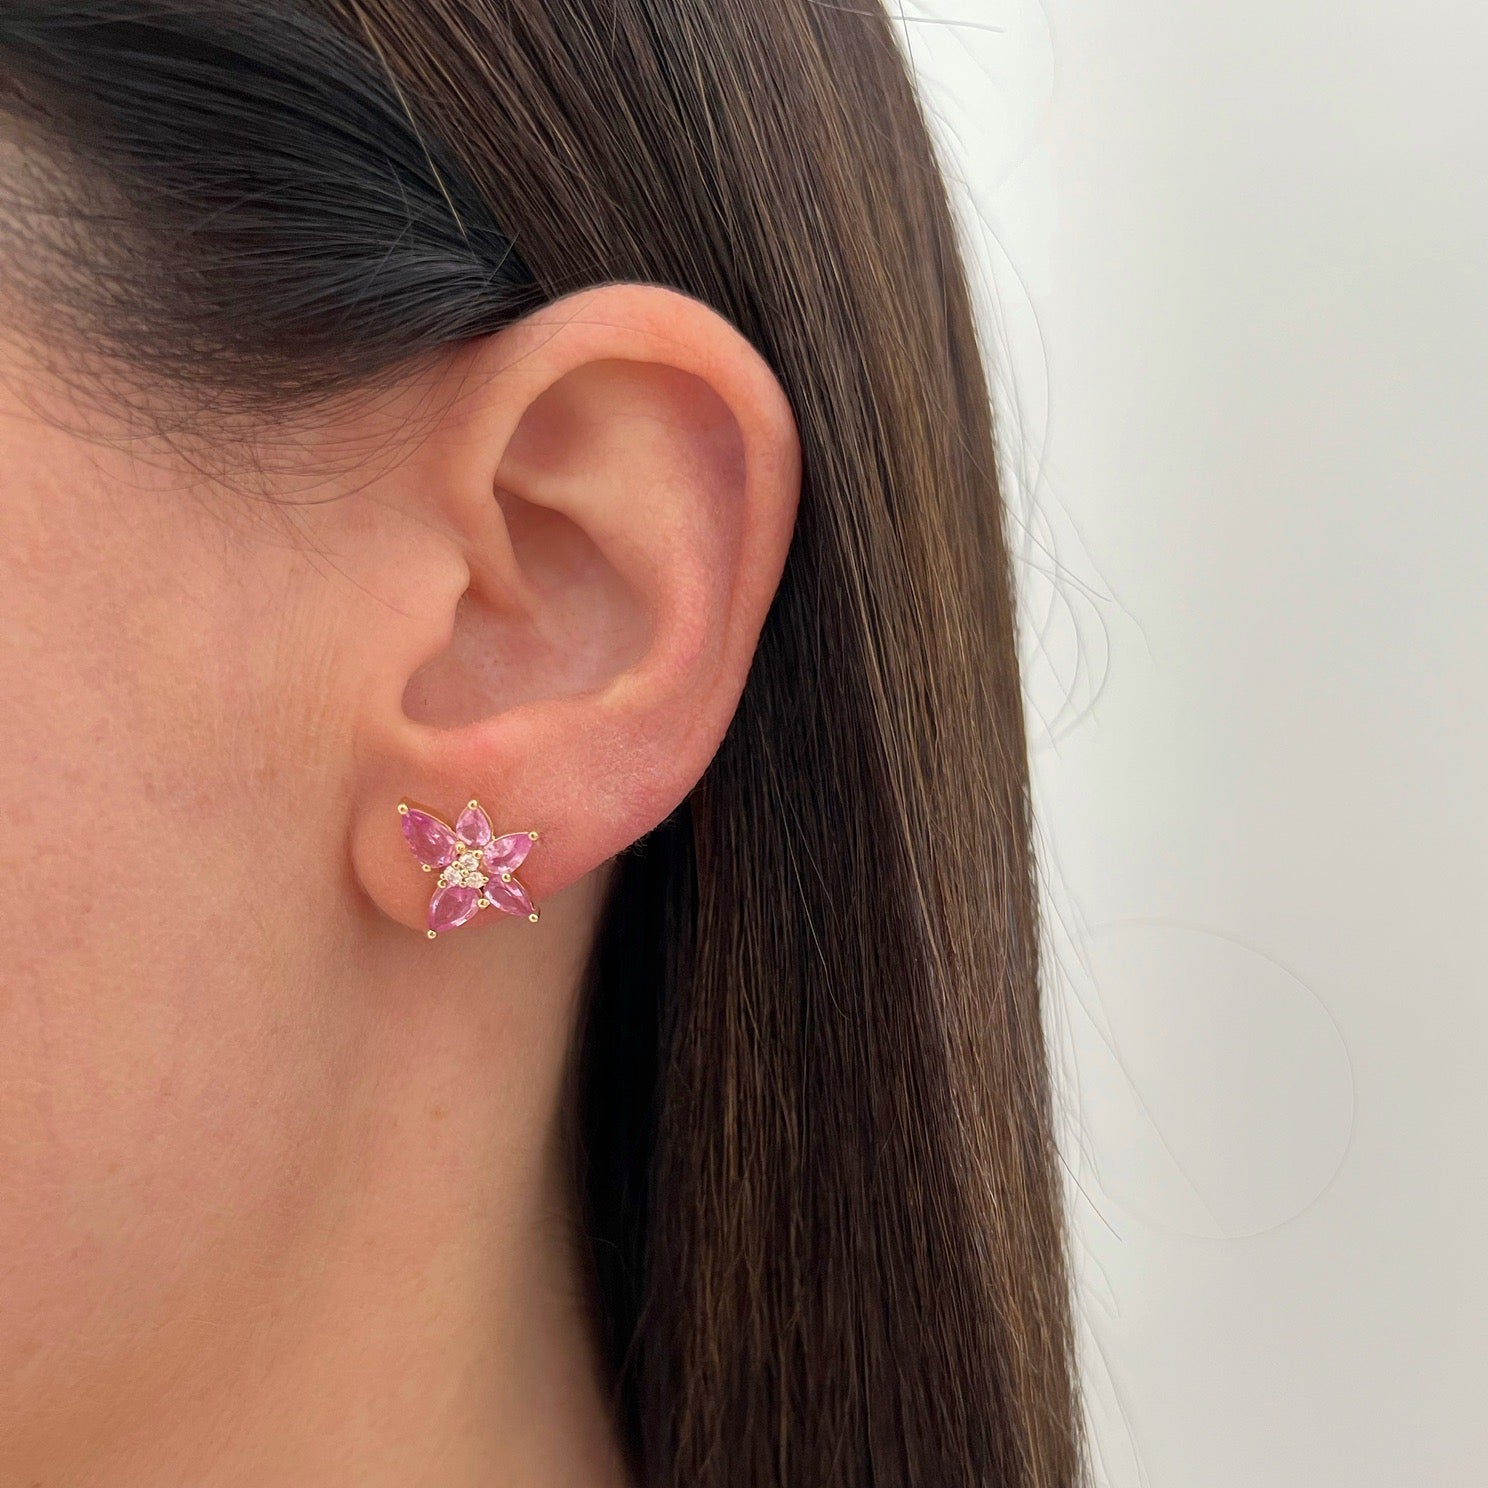 Pink Sapphire & Diamond Trio Cluster Stud Earring in 14k yellow gold styled on ear lobe of model with brown hair